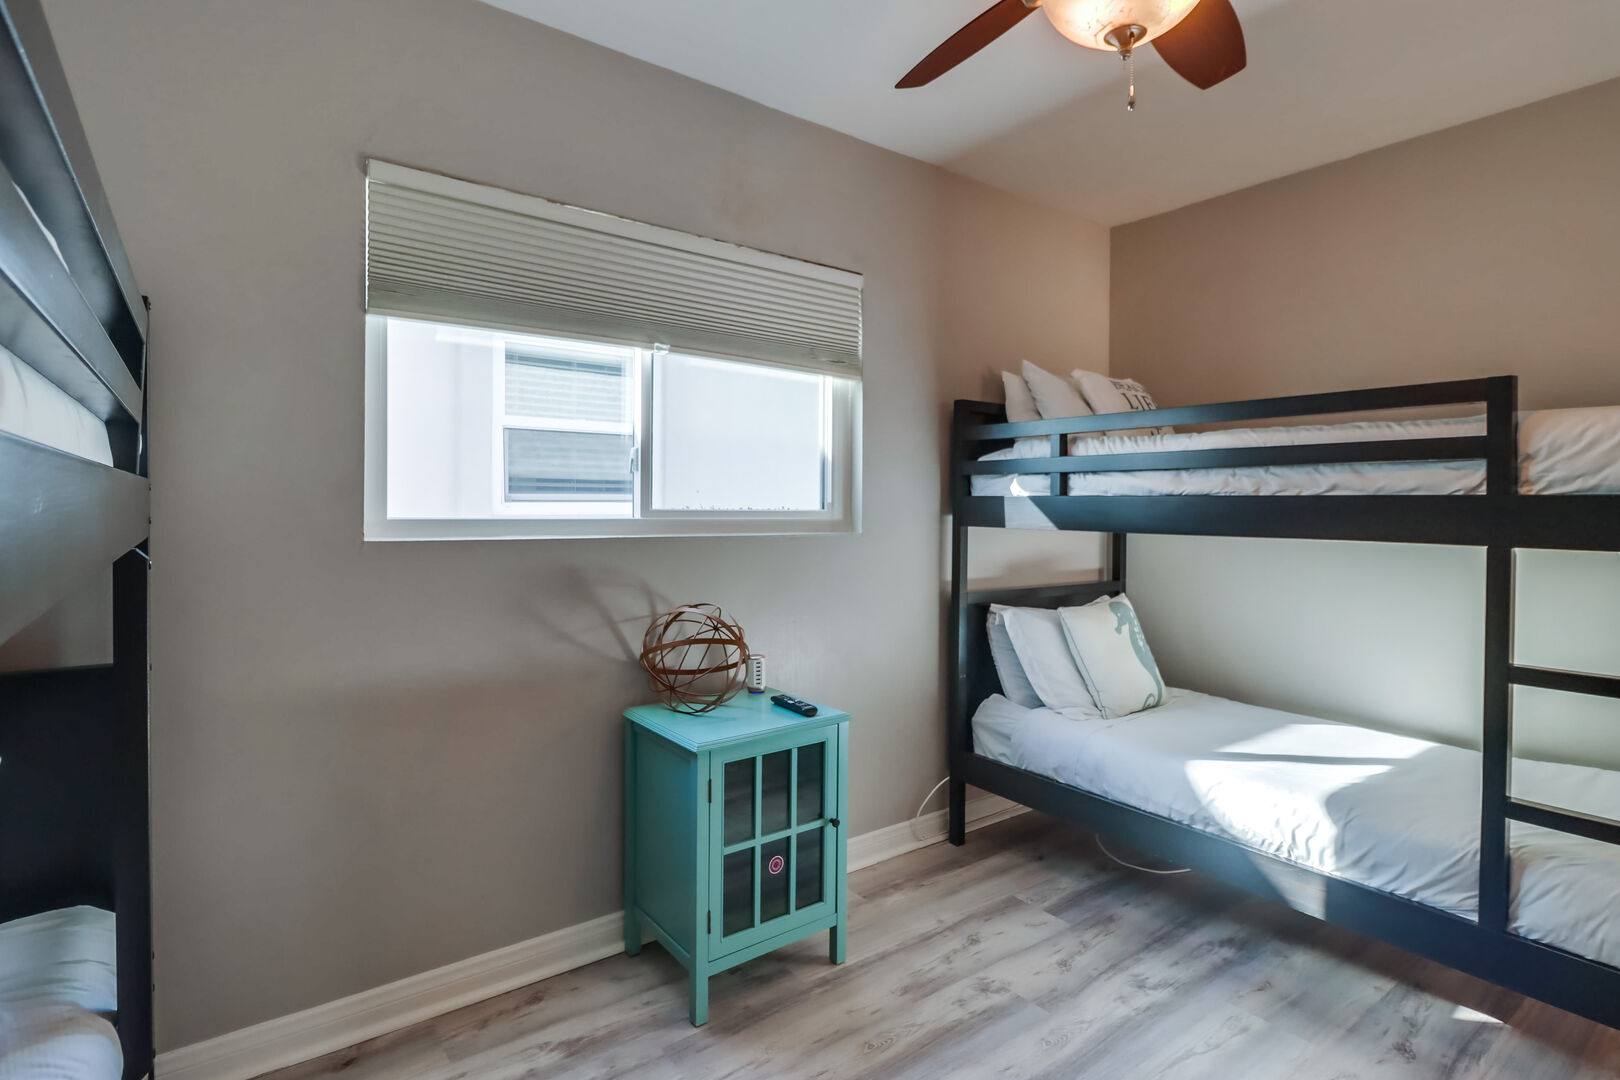 Second level guest bedroom great for kids with ample floor space, closet storage and ceiling fan